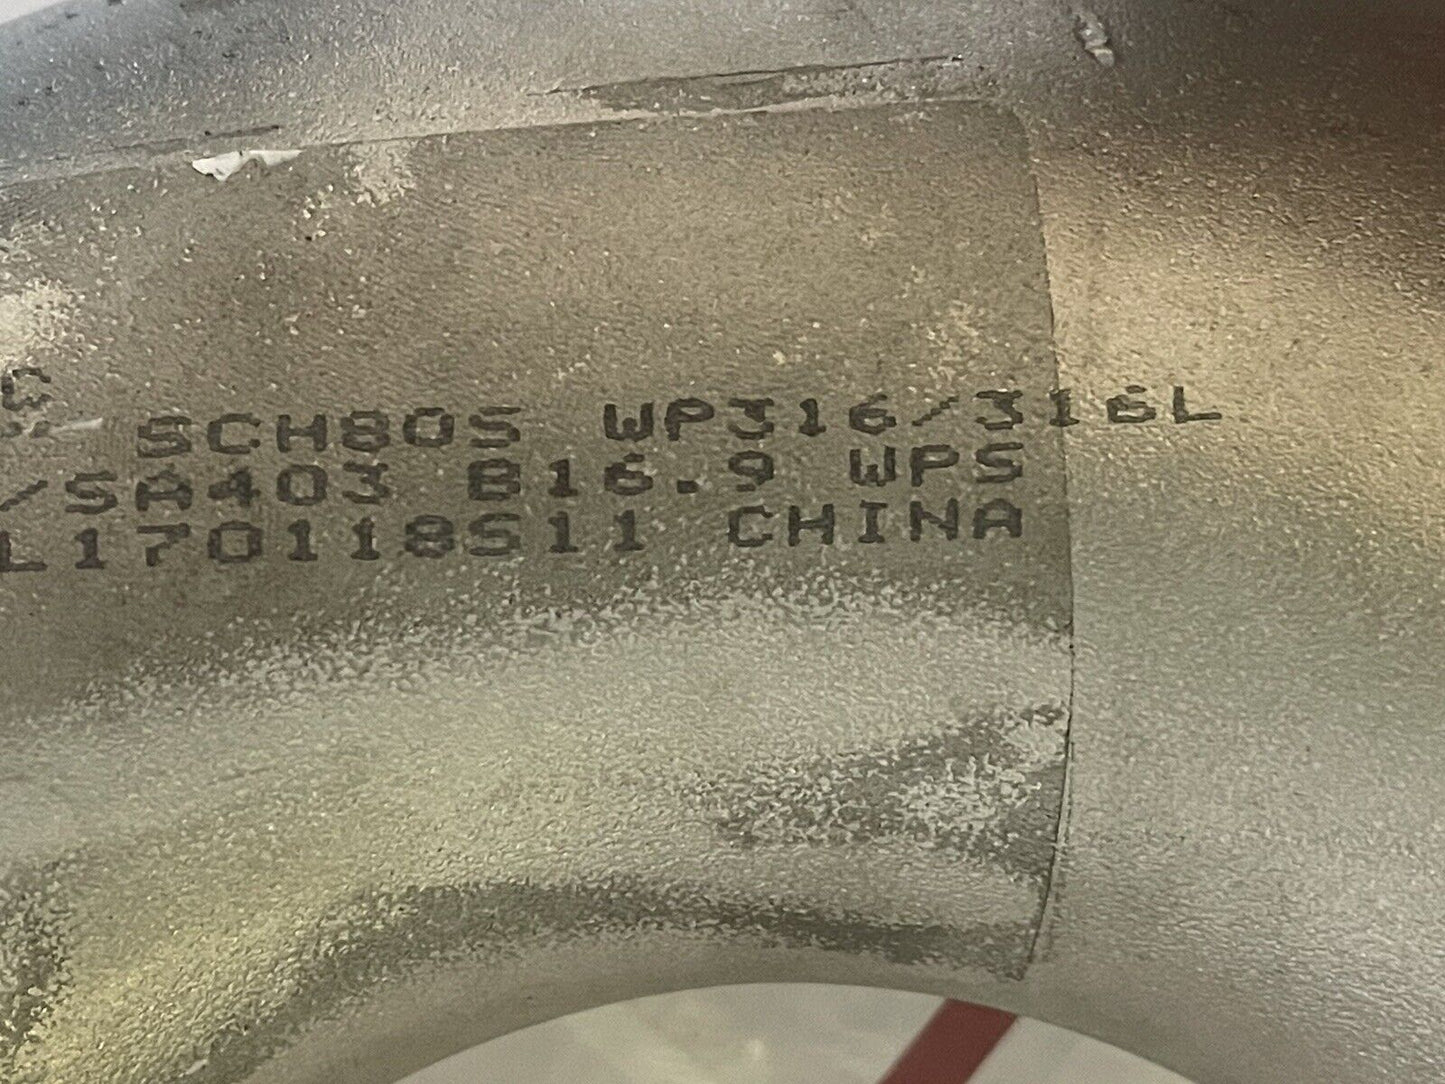 90 DEGREES 3" PIPE SIZE BUTT-WELD ELBOW, A/SA403, WP316/316L, SCH. 80S, 316 SS